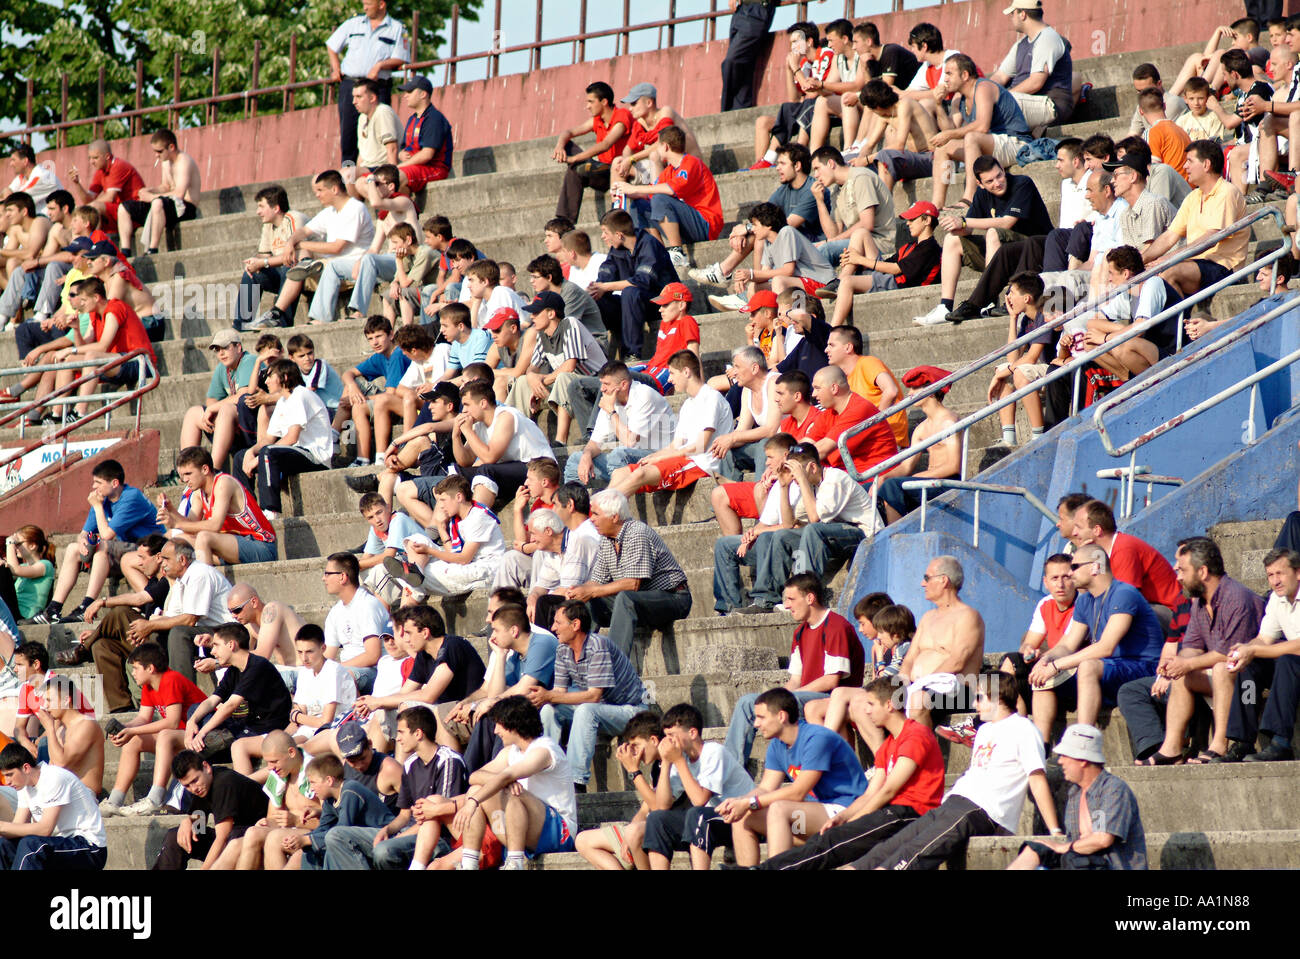 Crowd in a Sports Stadium Stock Photo